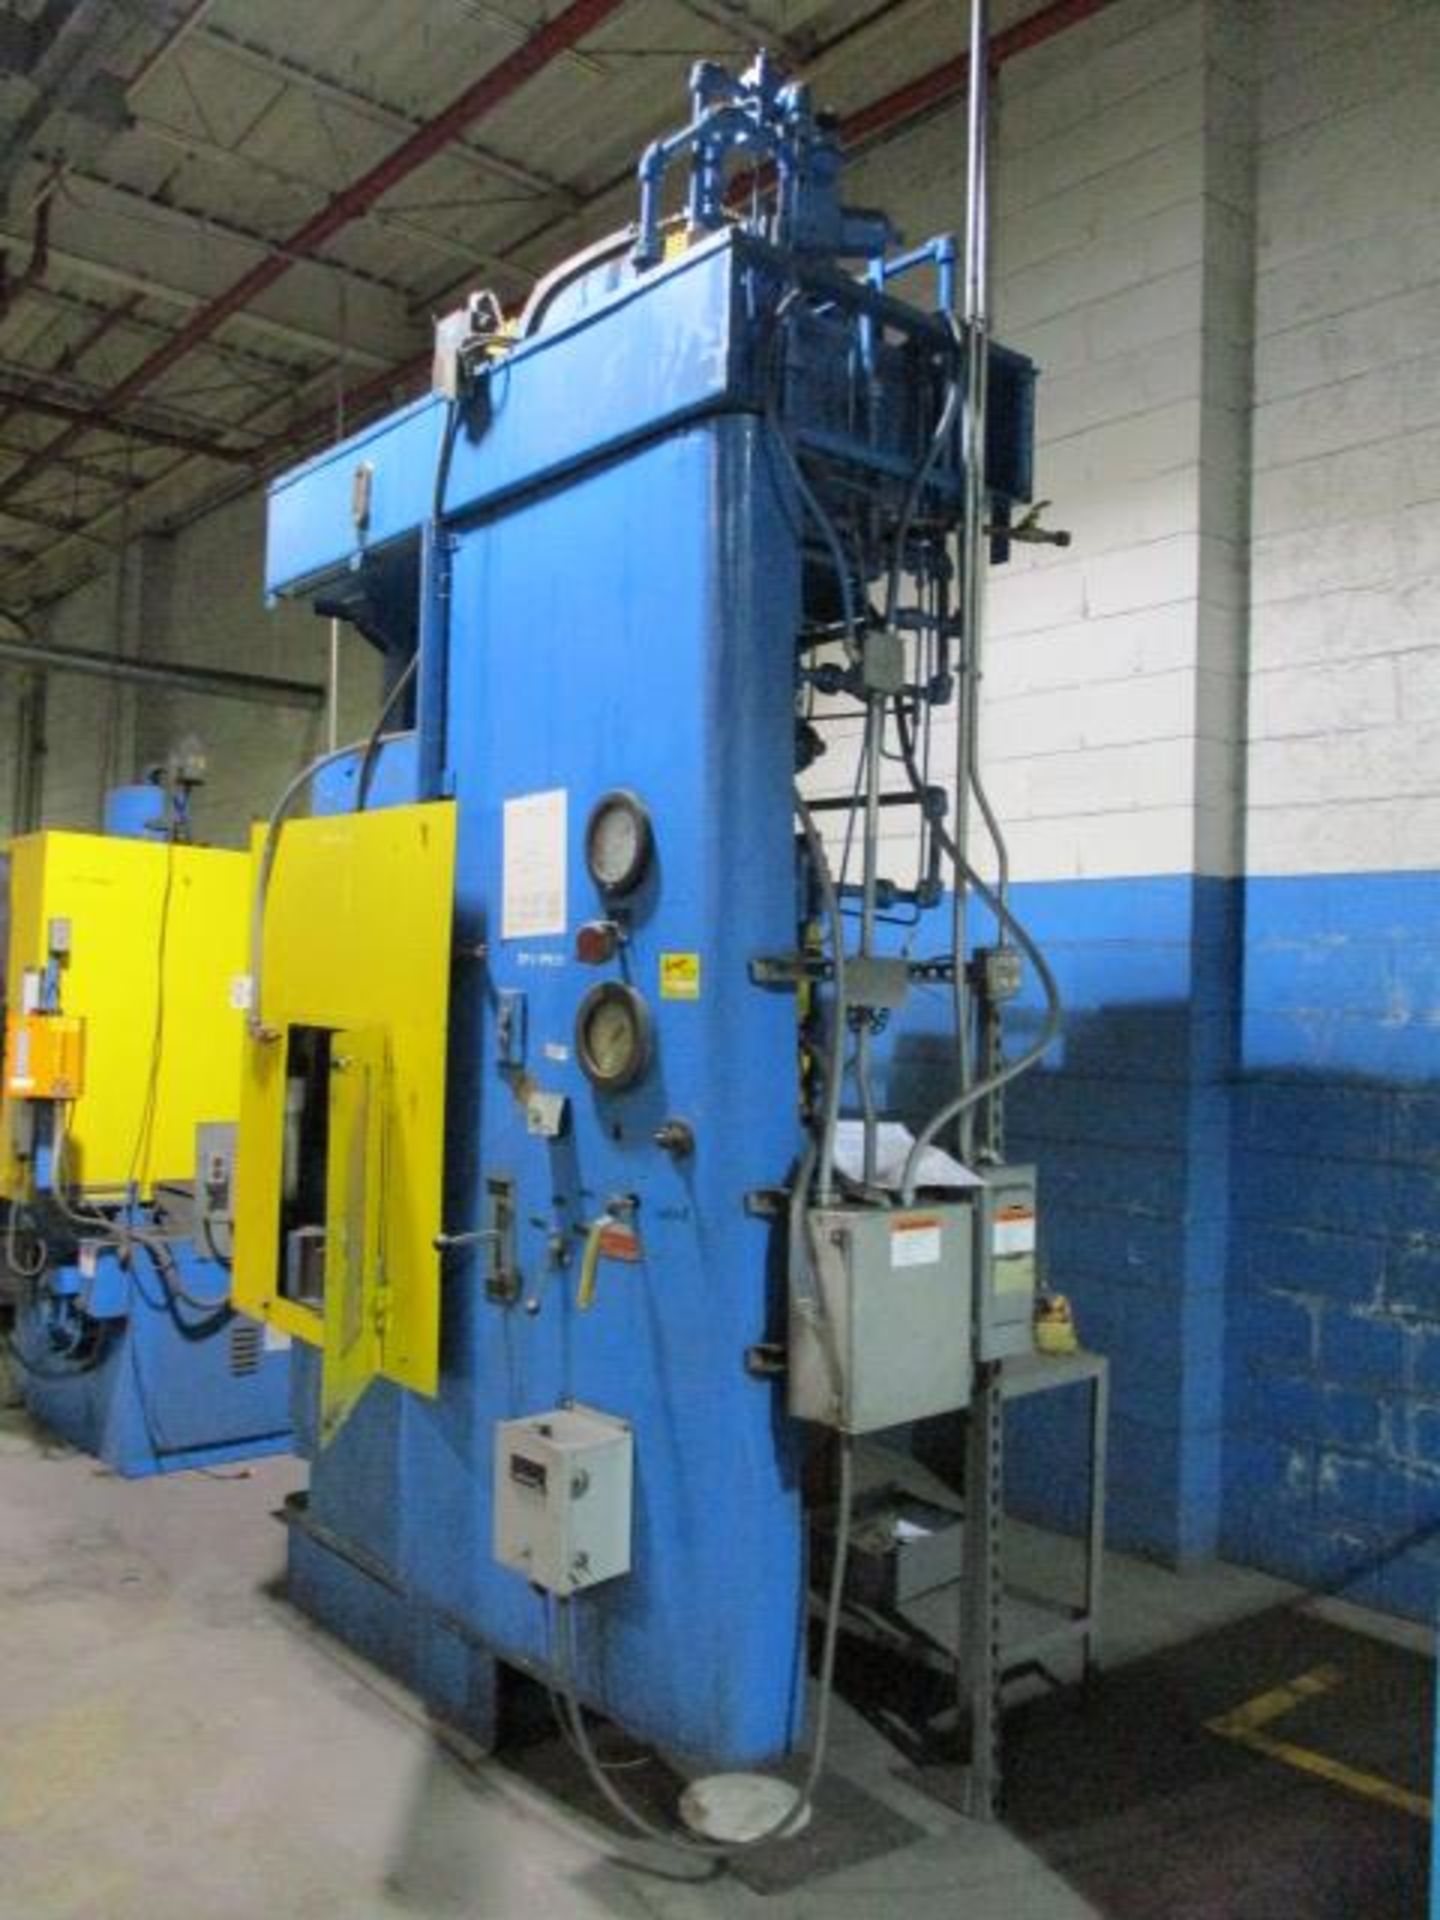 Mohr/Modern Hydraulic Corp 200 Ton IR Side Compaction Press - Image 5 of 7